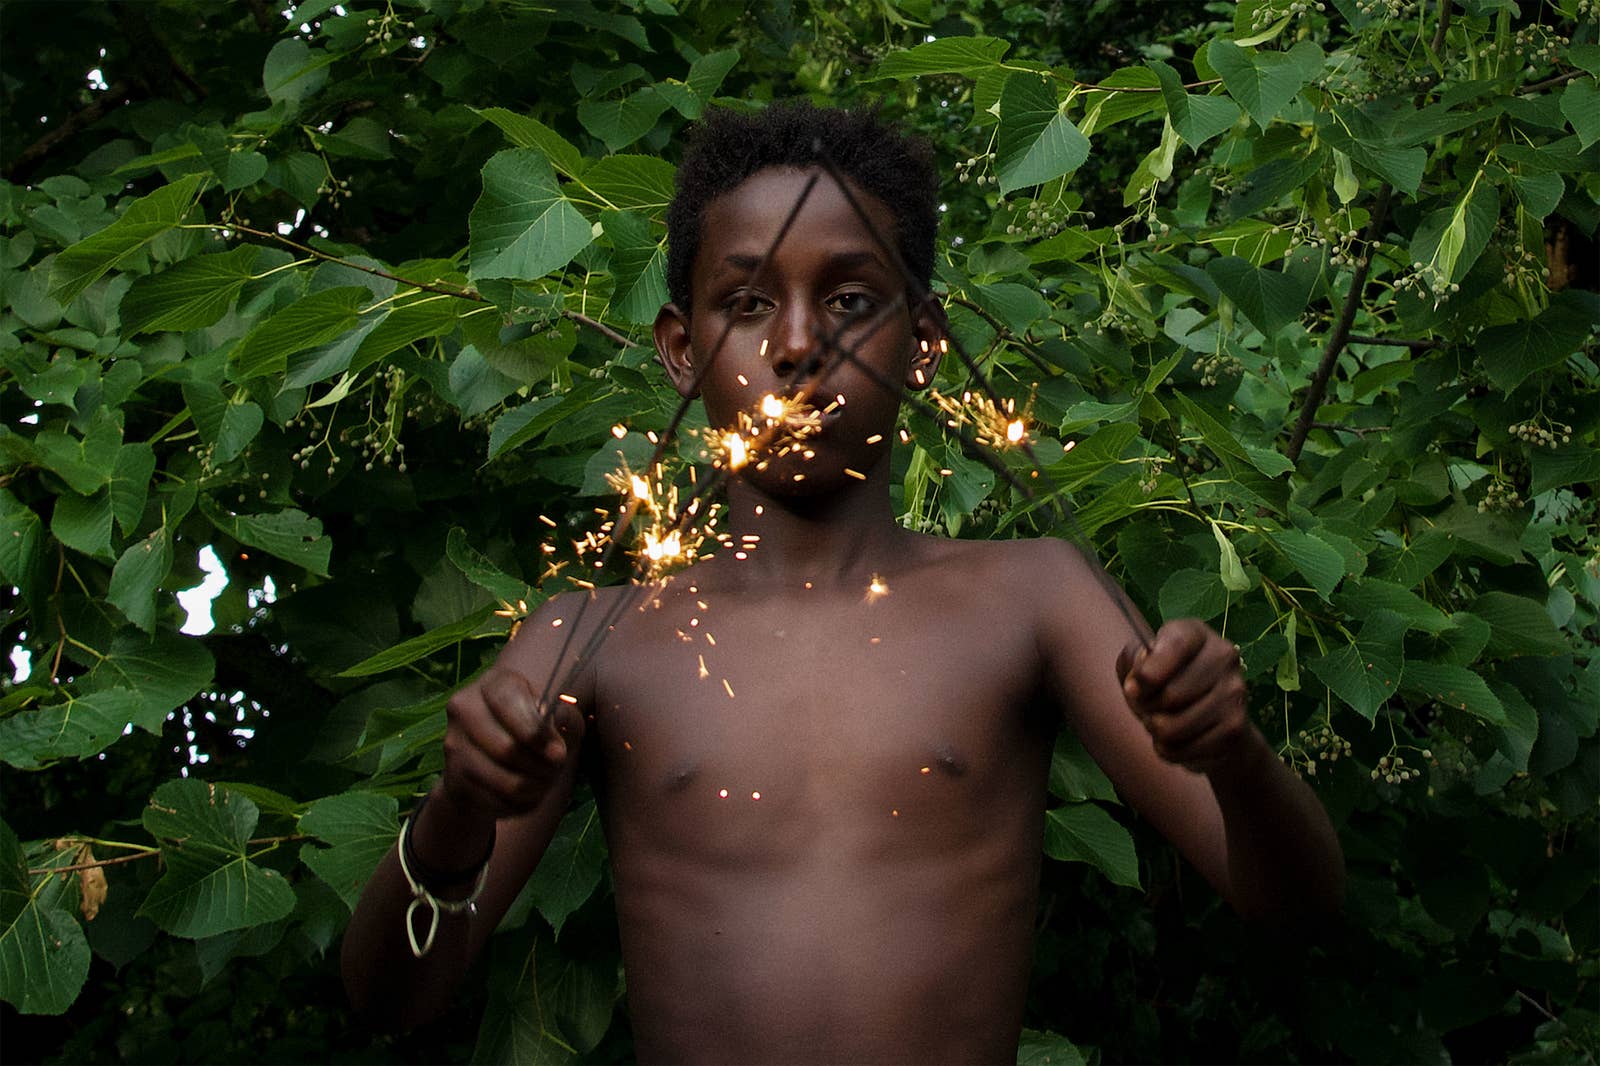 A shirtless child standing in front of a bush holds up lit-up sparklers in both hands